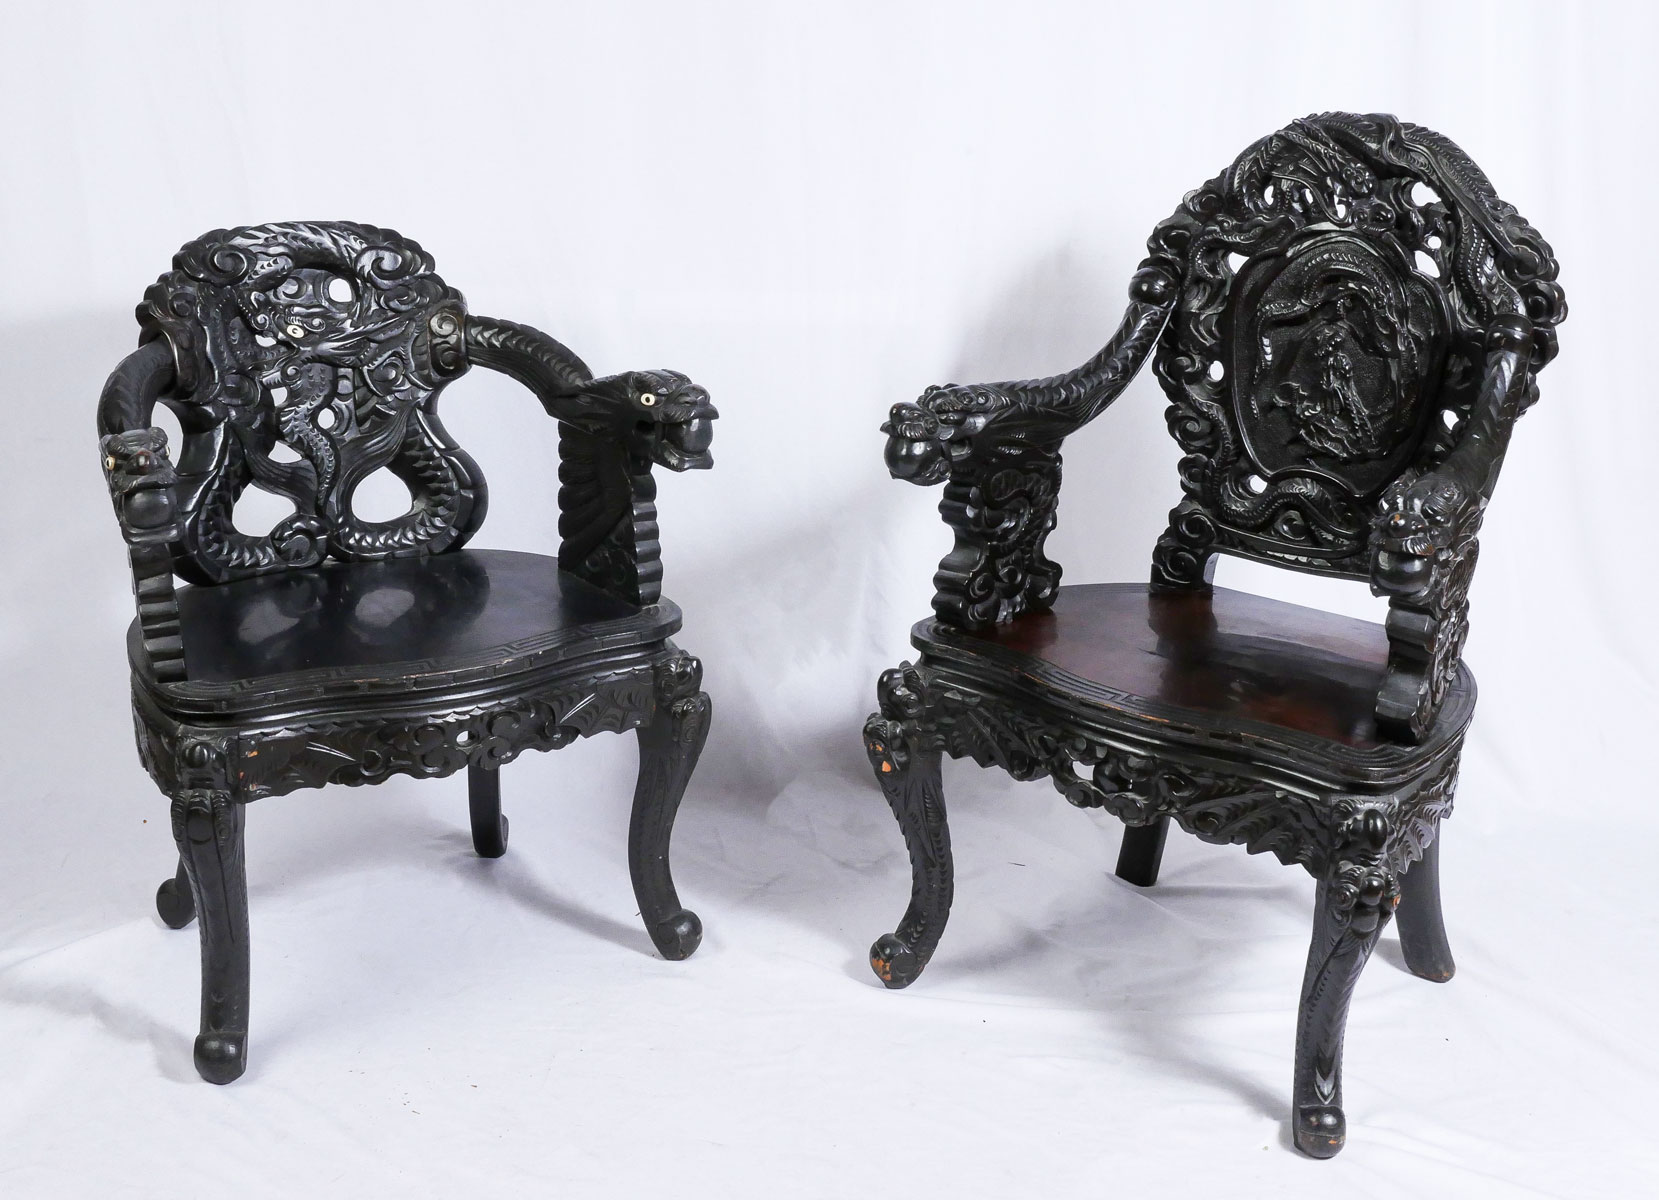 2 JAPANESE CARVED & LACQUERED DRAGON